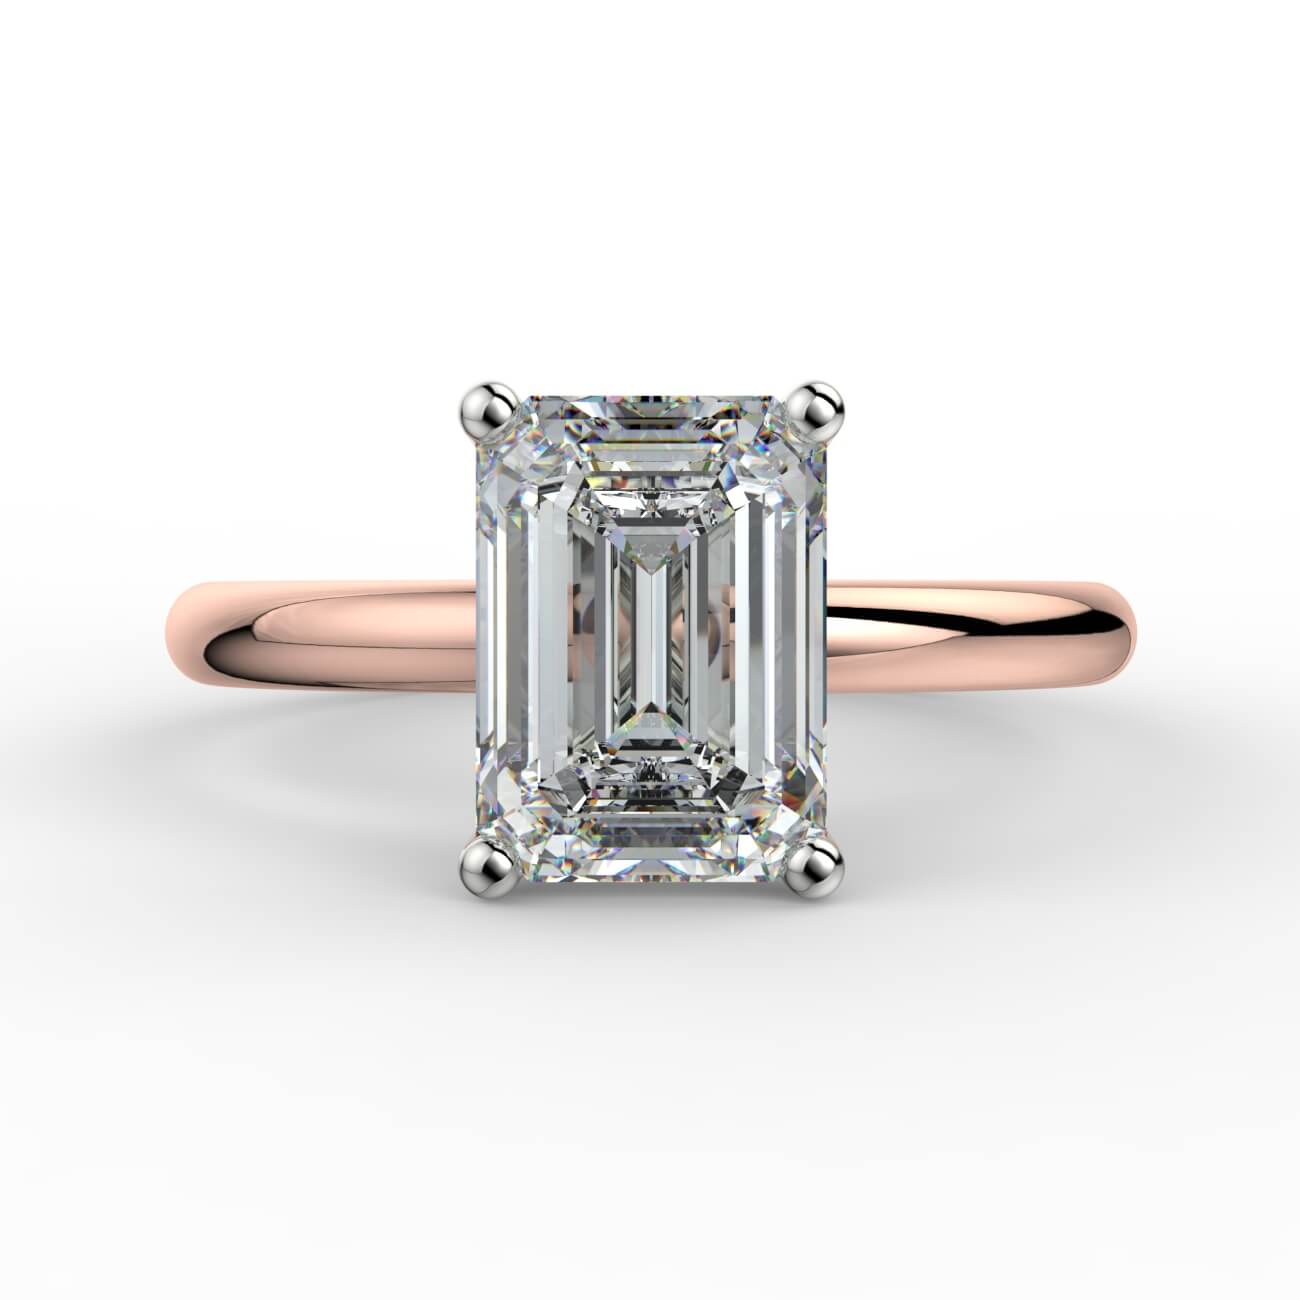 Comfort fit 4 claw emerald cut solitaire diamond ring in white and rose gold – Australian Diamond Network